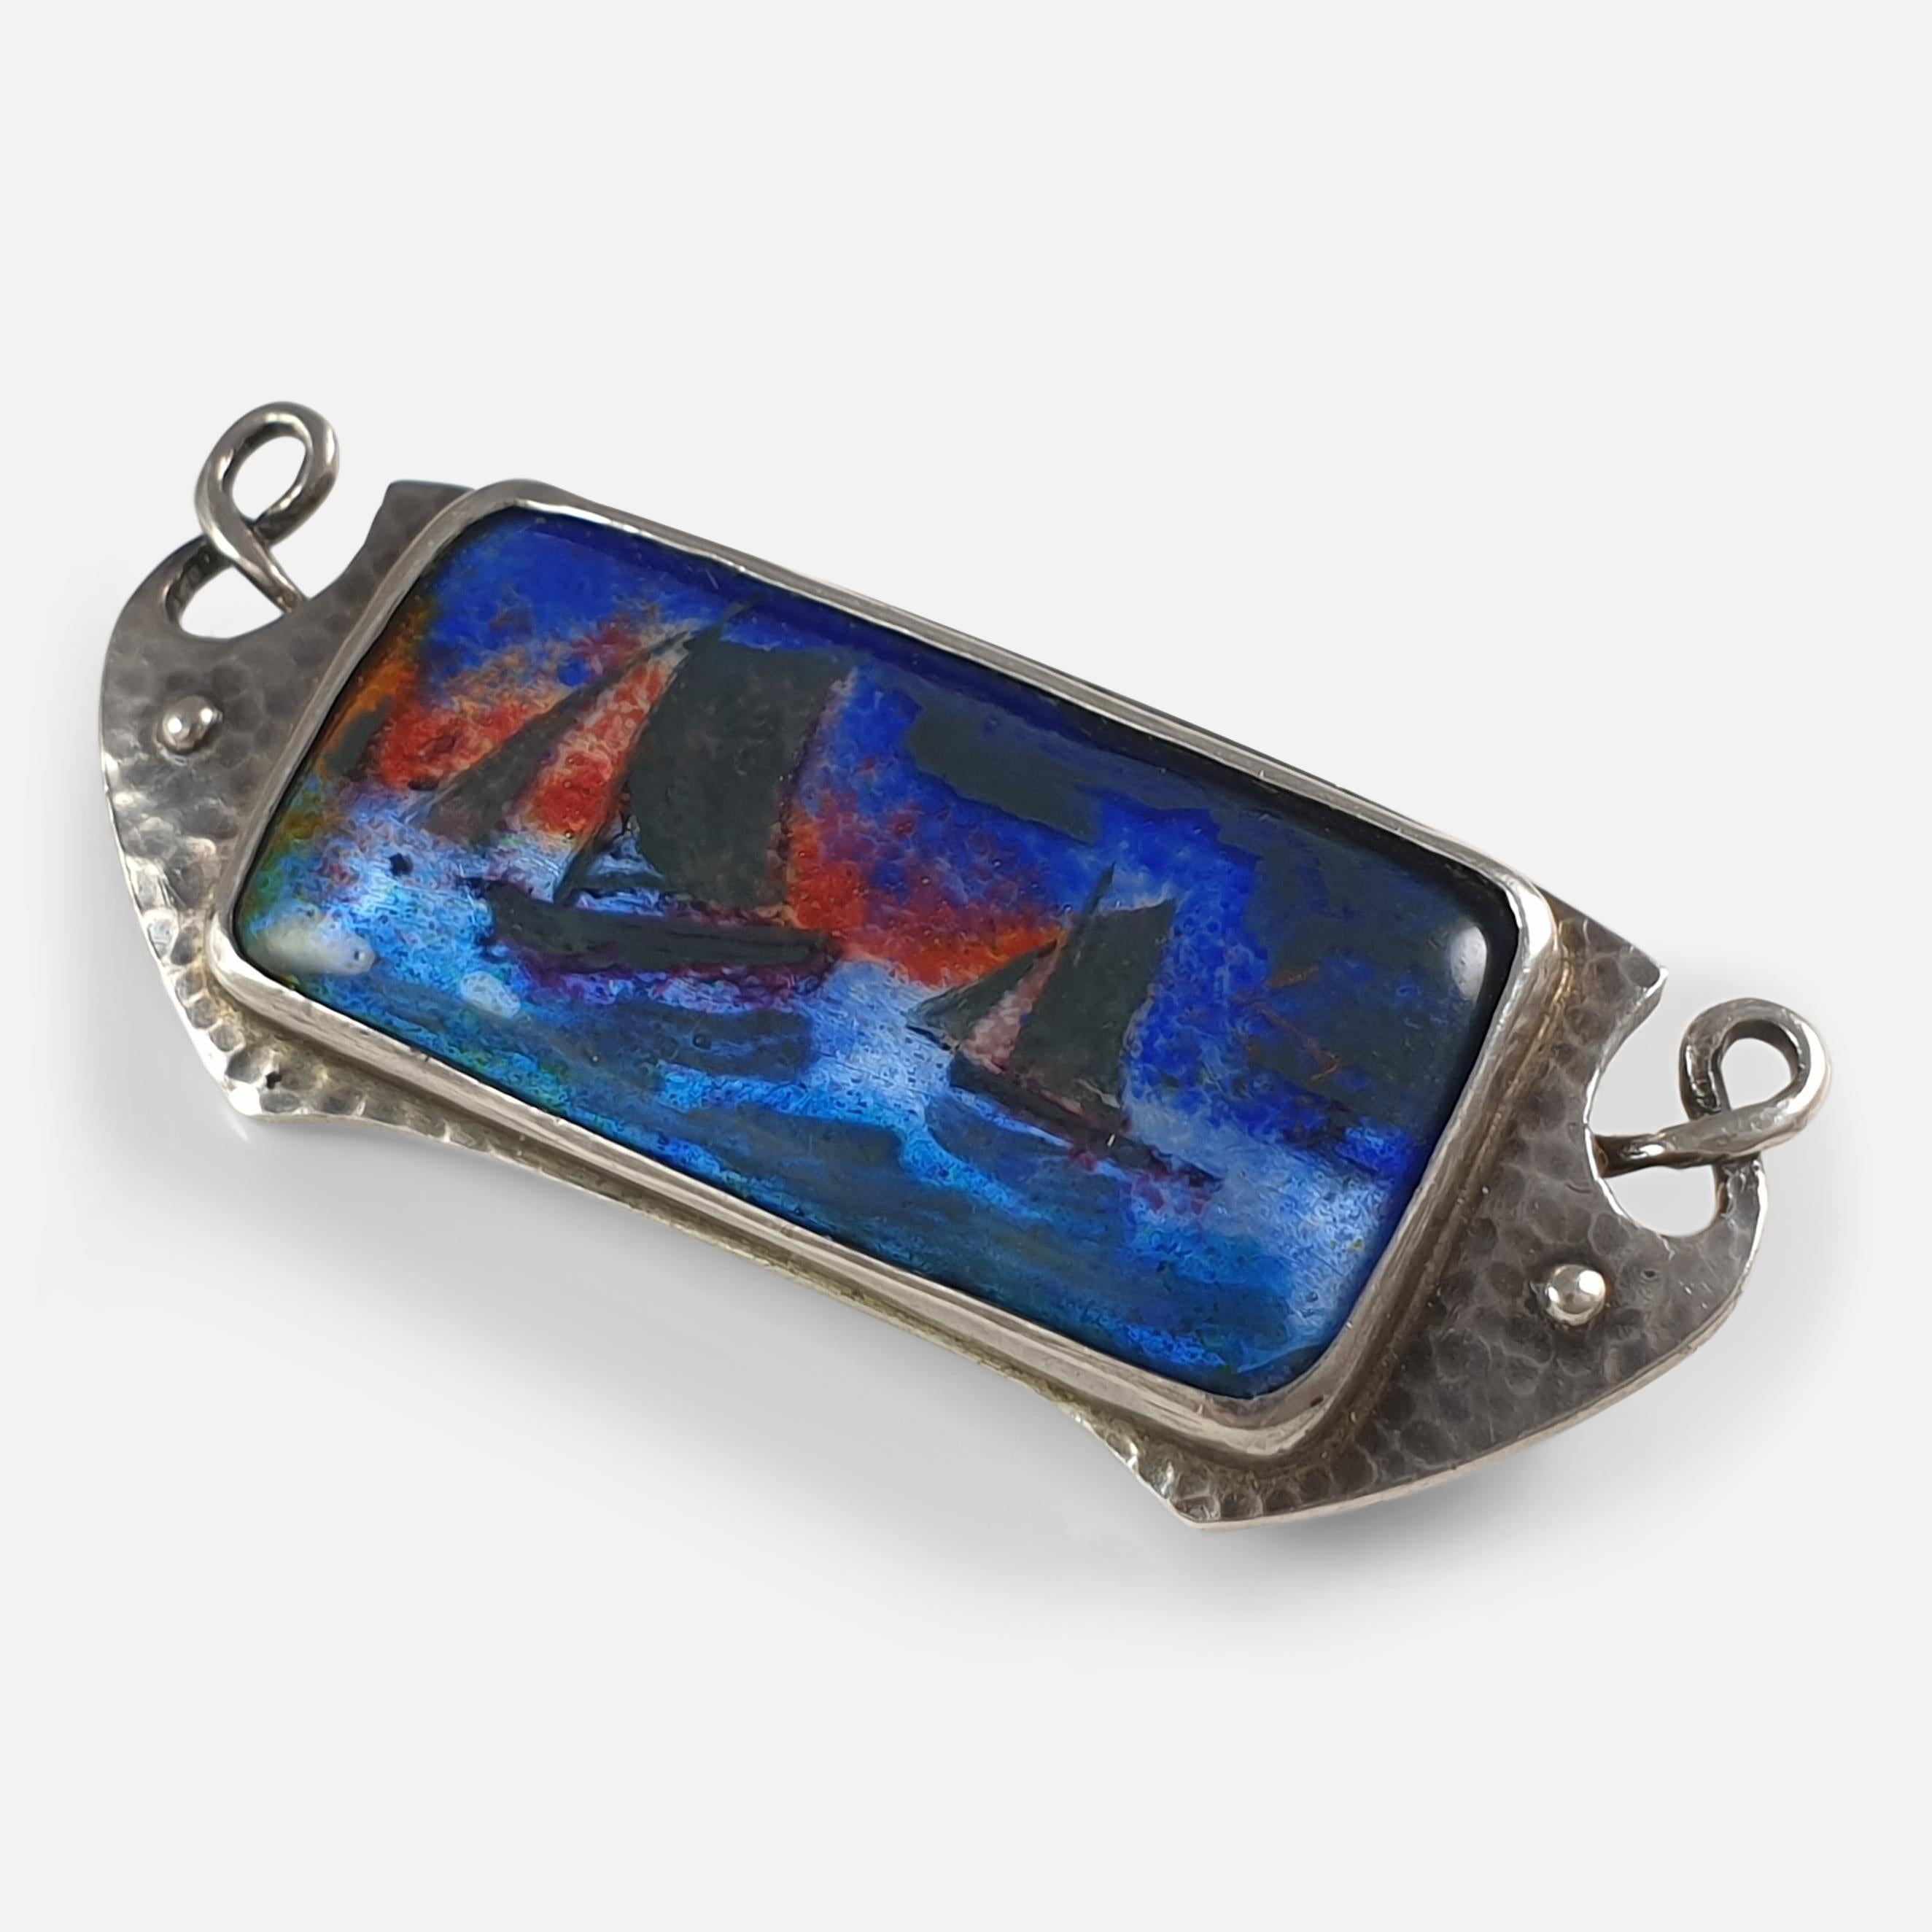 Arts & Crafts Silver and Enamel Plaque Brooch, Murrle Bennett & Co., circa 1910 For Sale 7